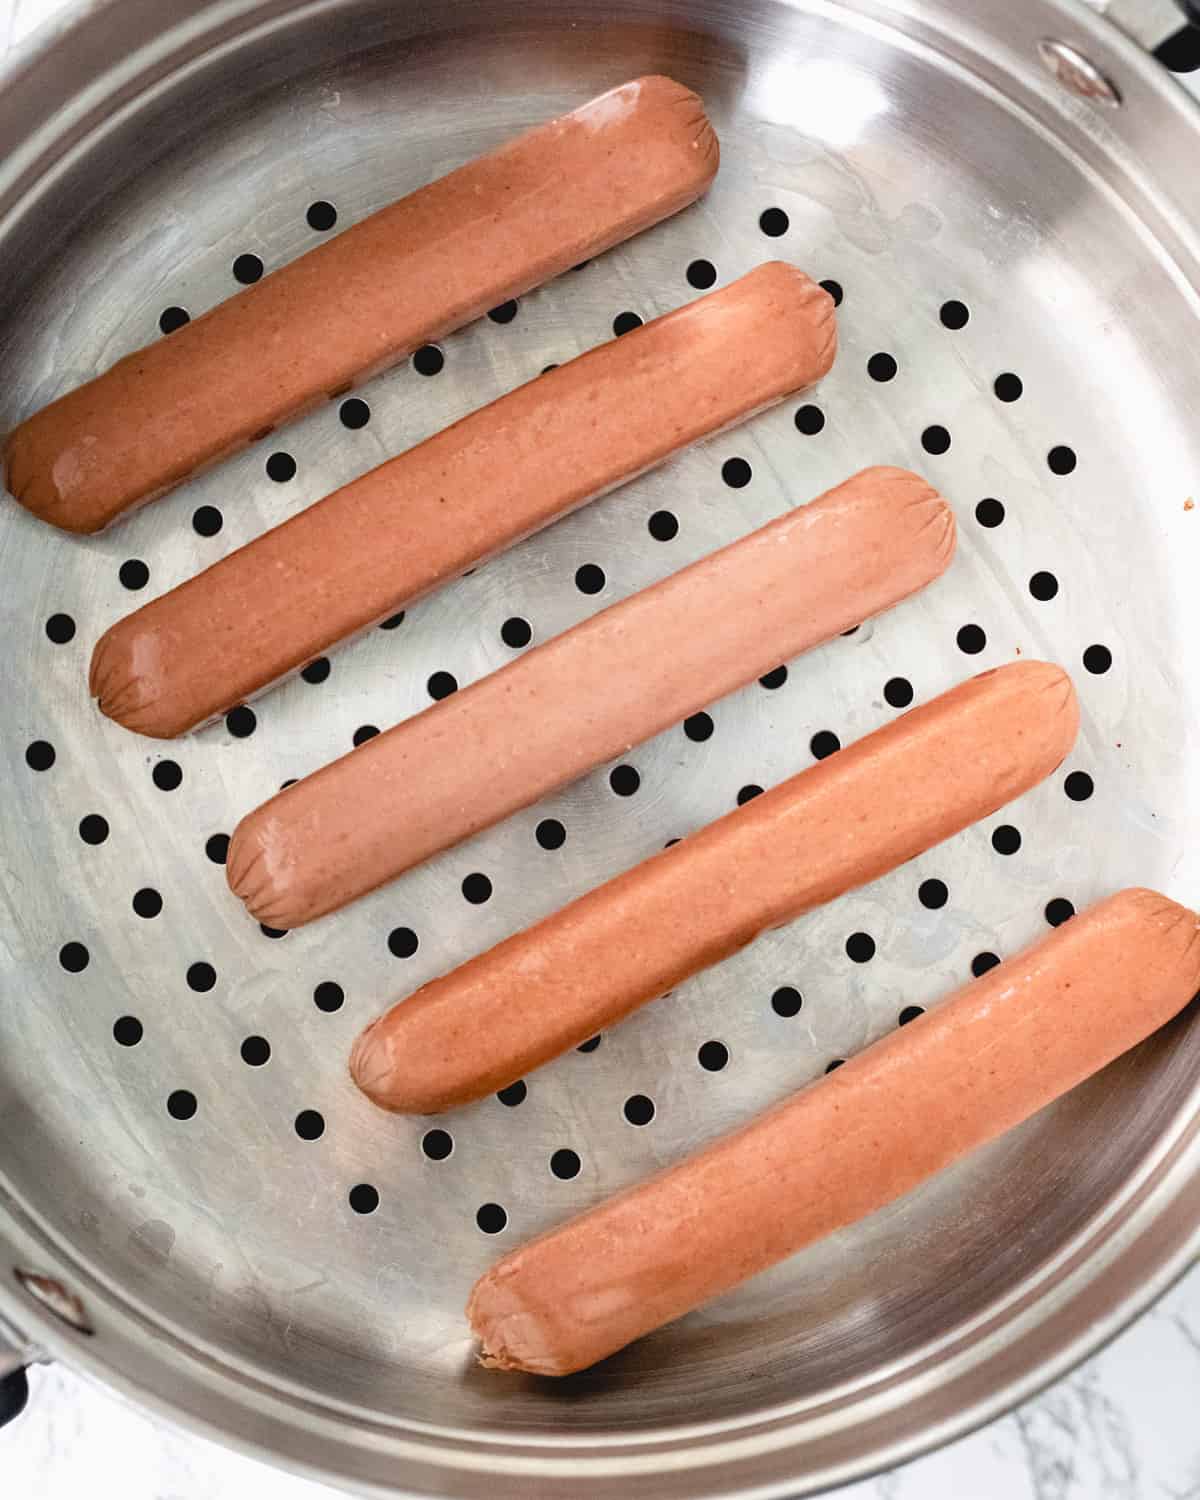 Five hot dogs laying in a steamer basket.